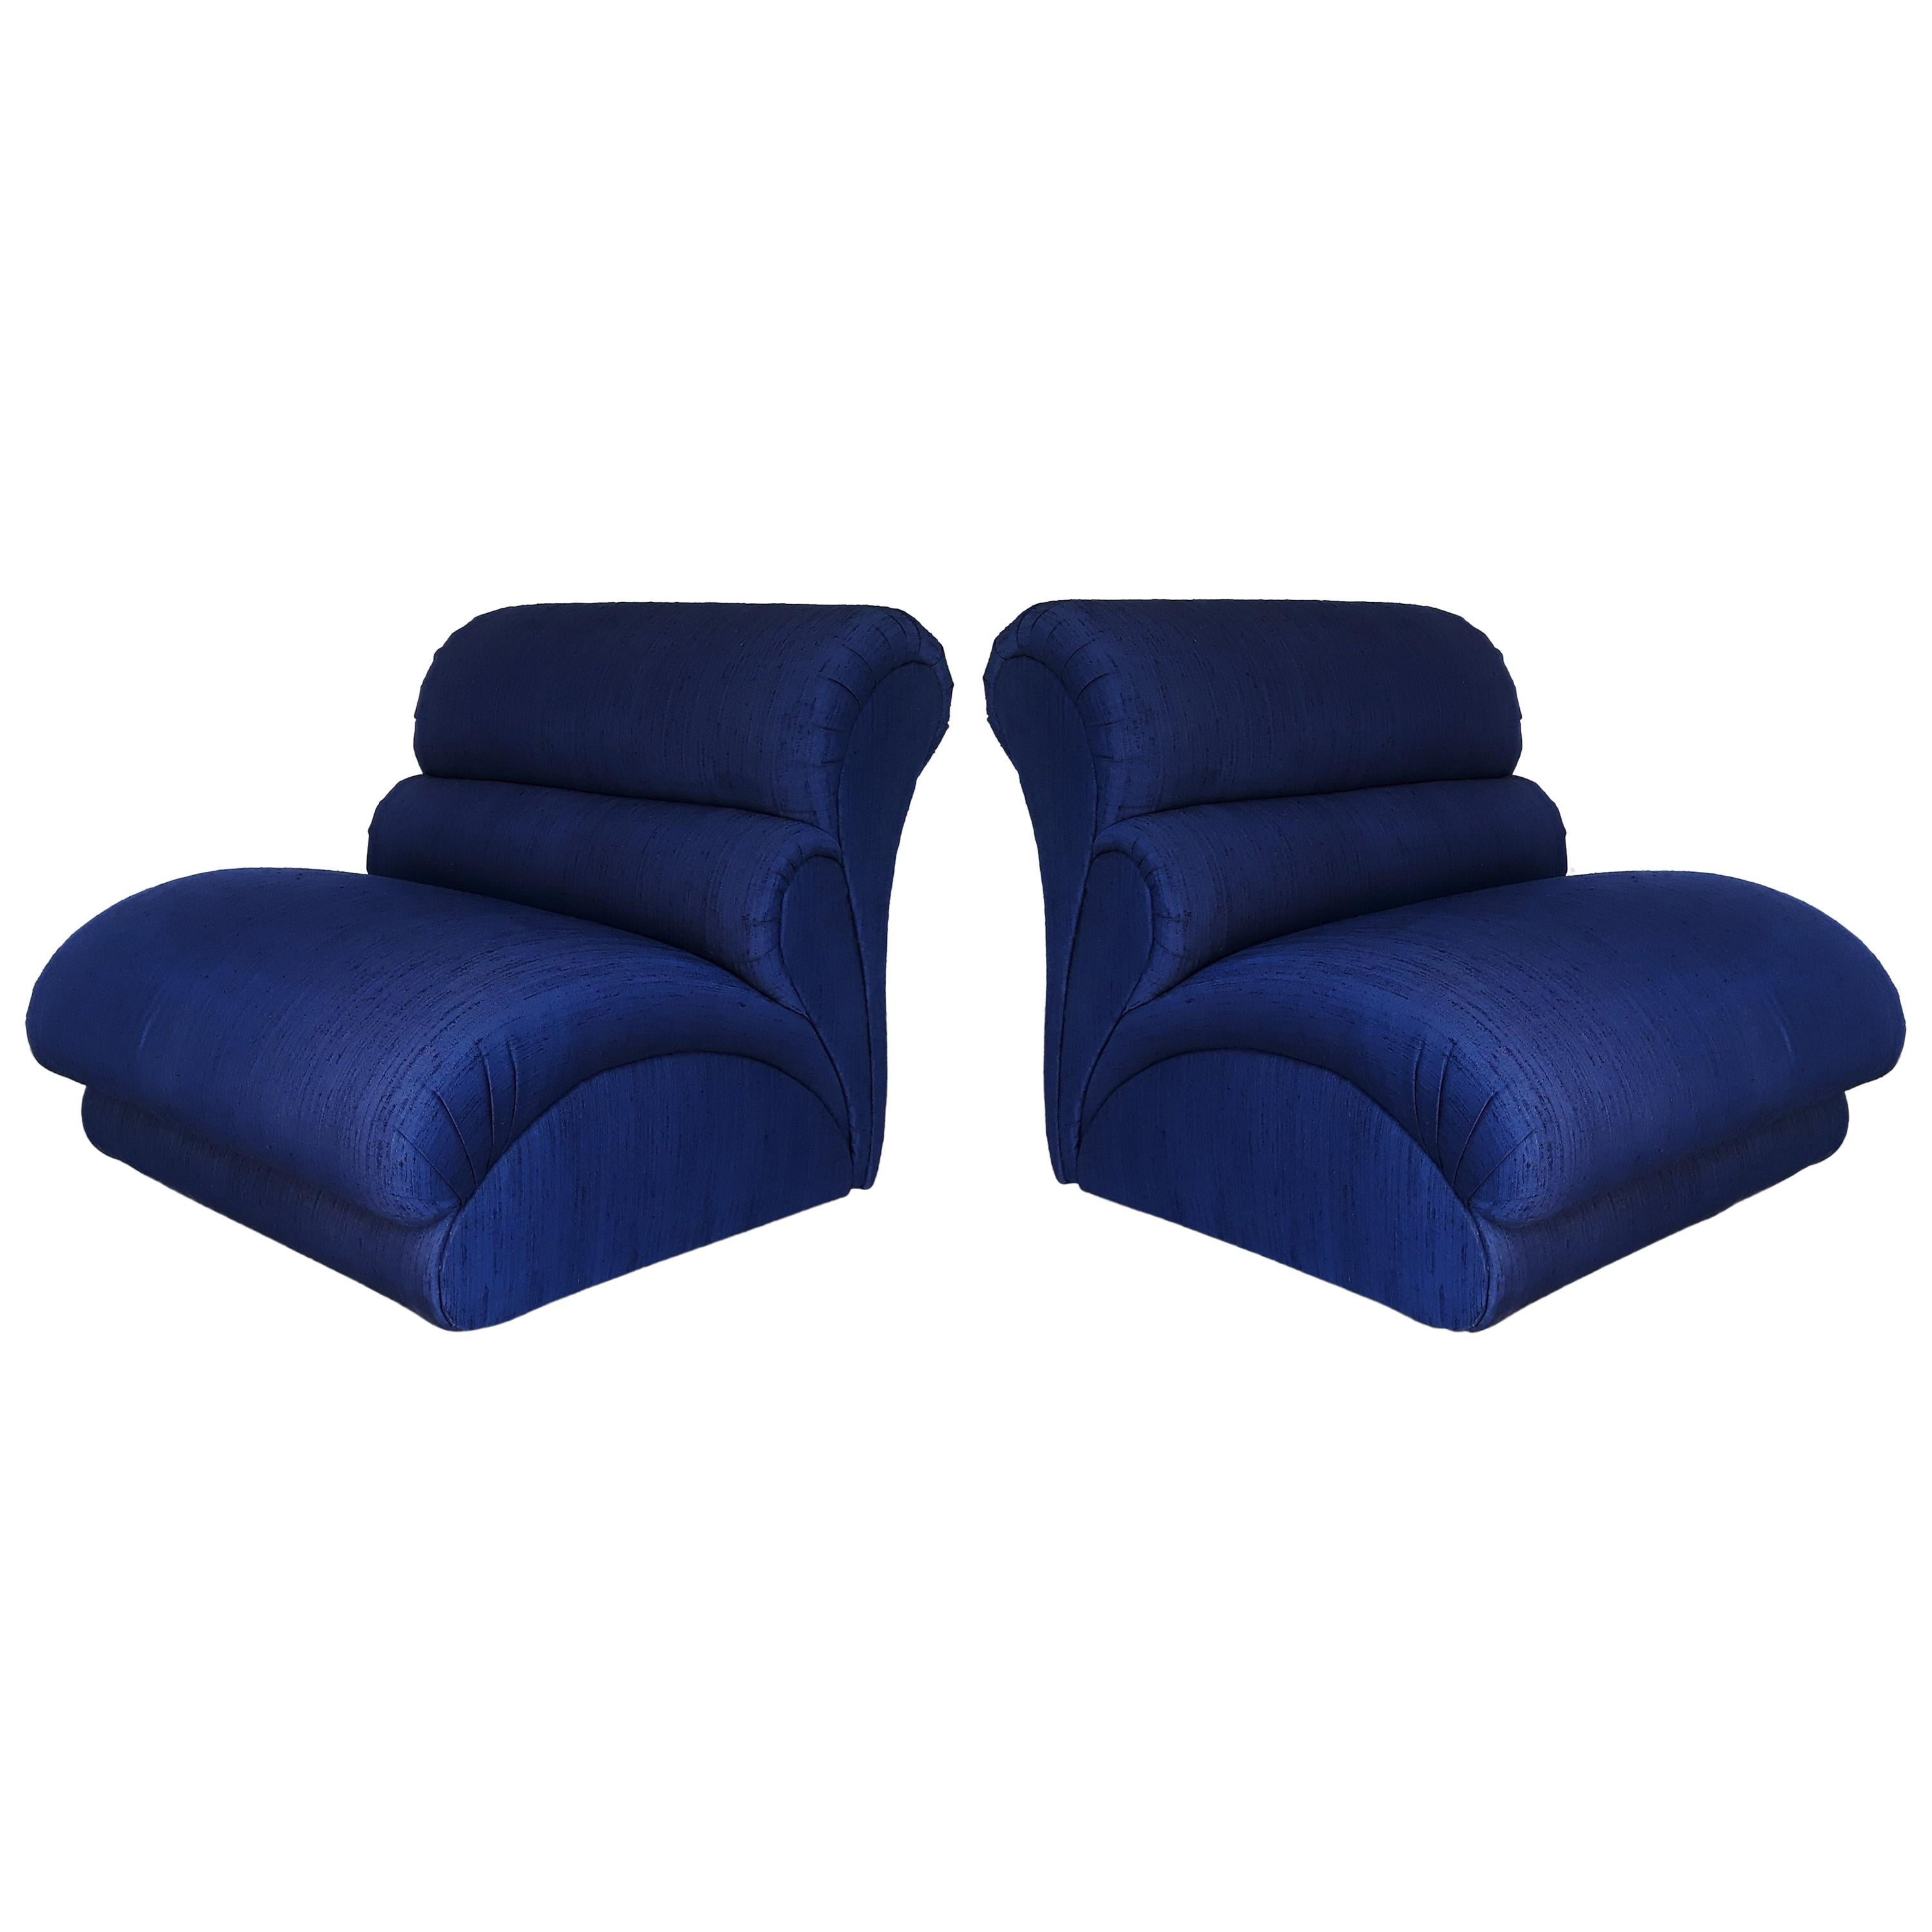 Pair of Modern Biomorphic Lounge Chairs by Weiman, 1980s